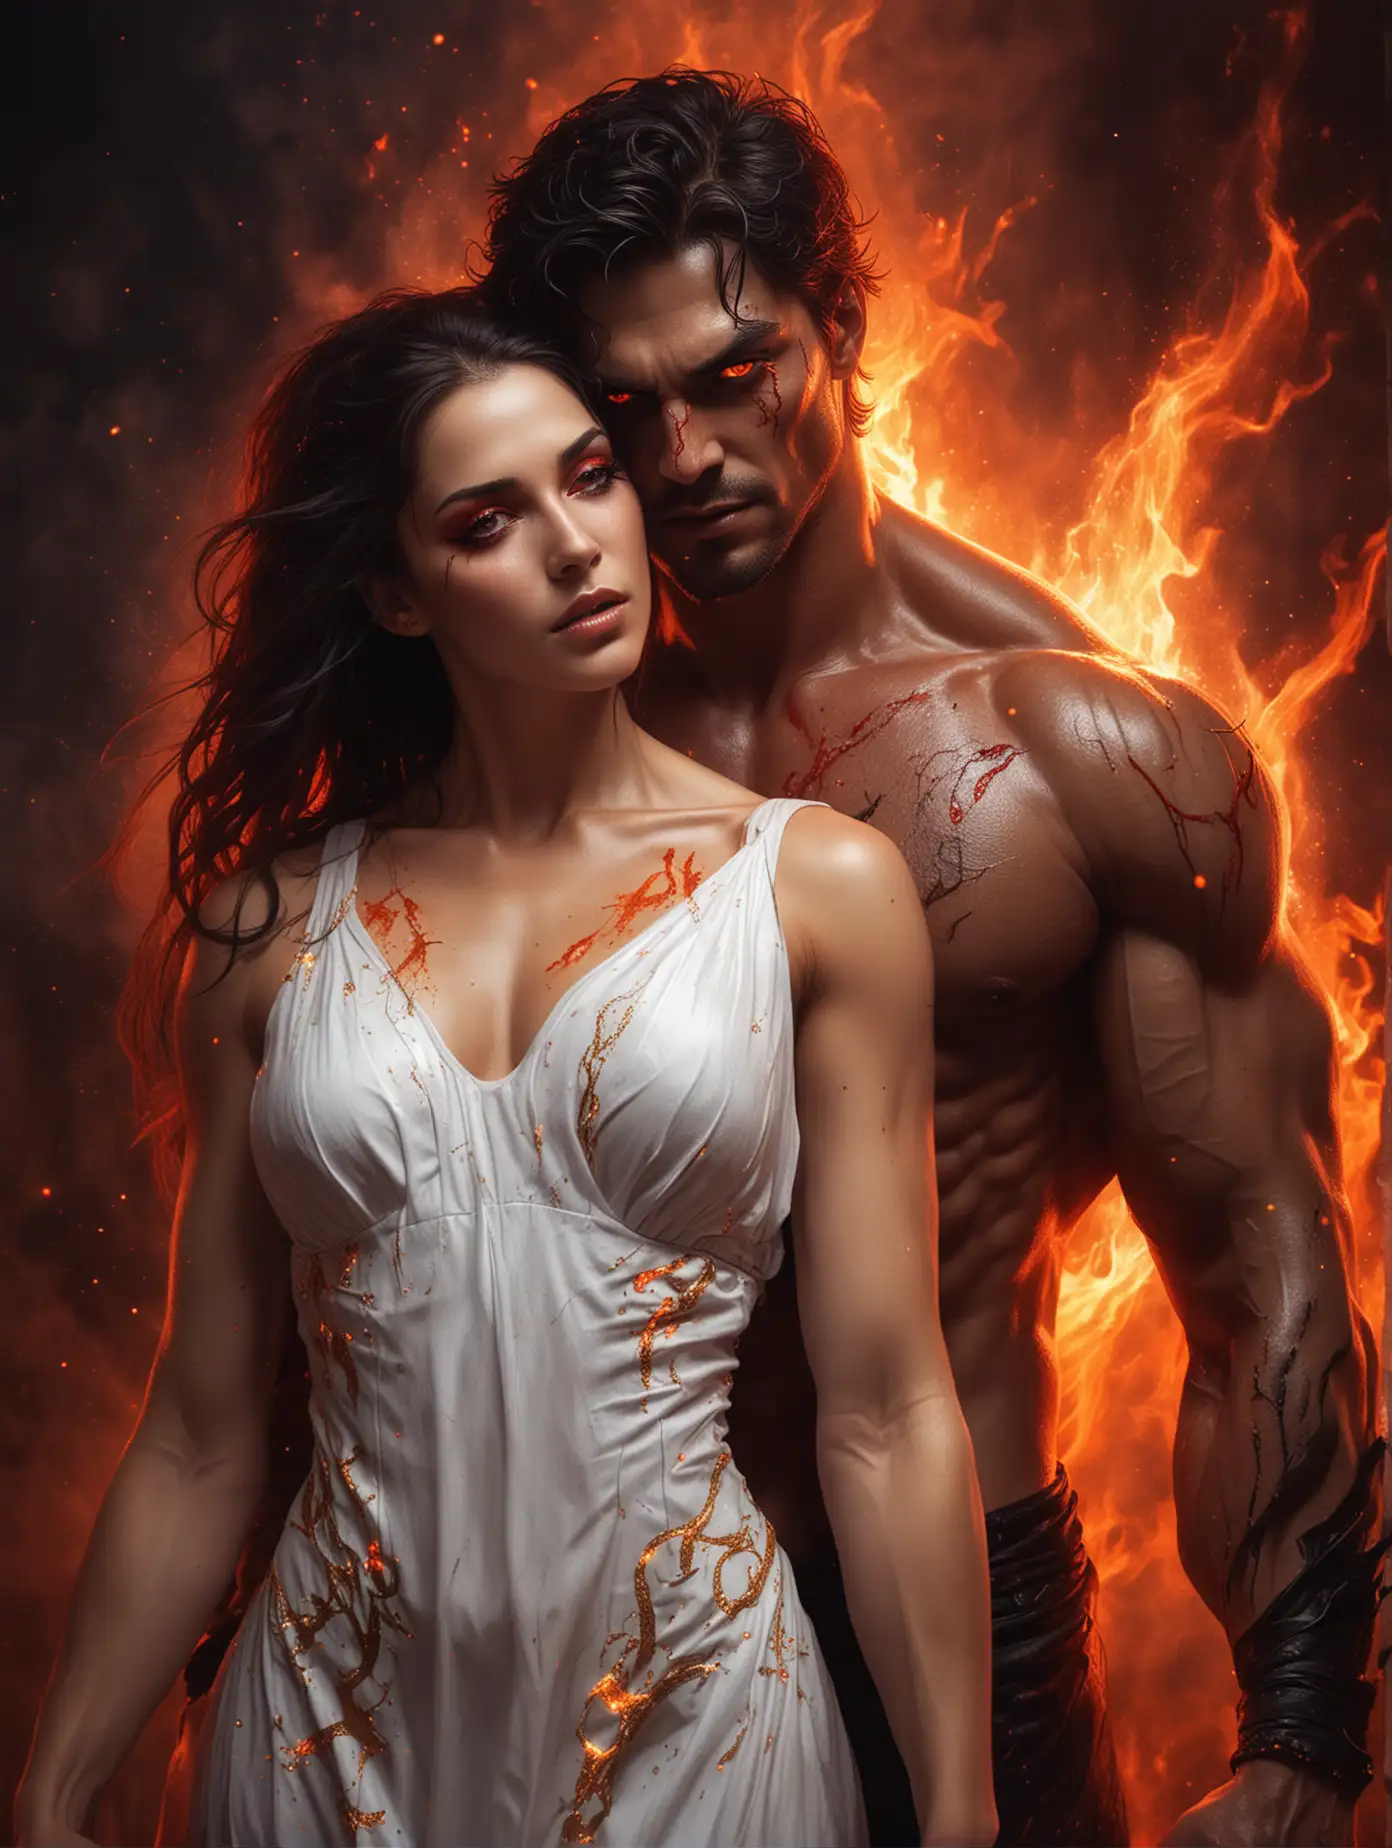 Illustration of a handsome evil incubus man,  he is very muscular, nice abs, he has led red eyes, he is looking intensely at the camera, he is in an embrace with a beautiful woman wearing a short white dress, black and red fog, orange flames, gold sparks, up close